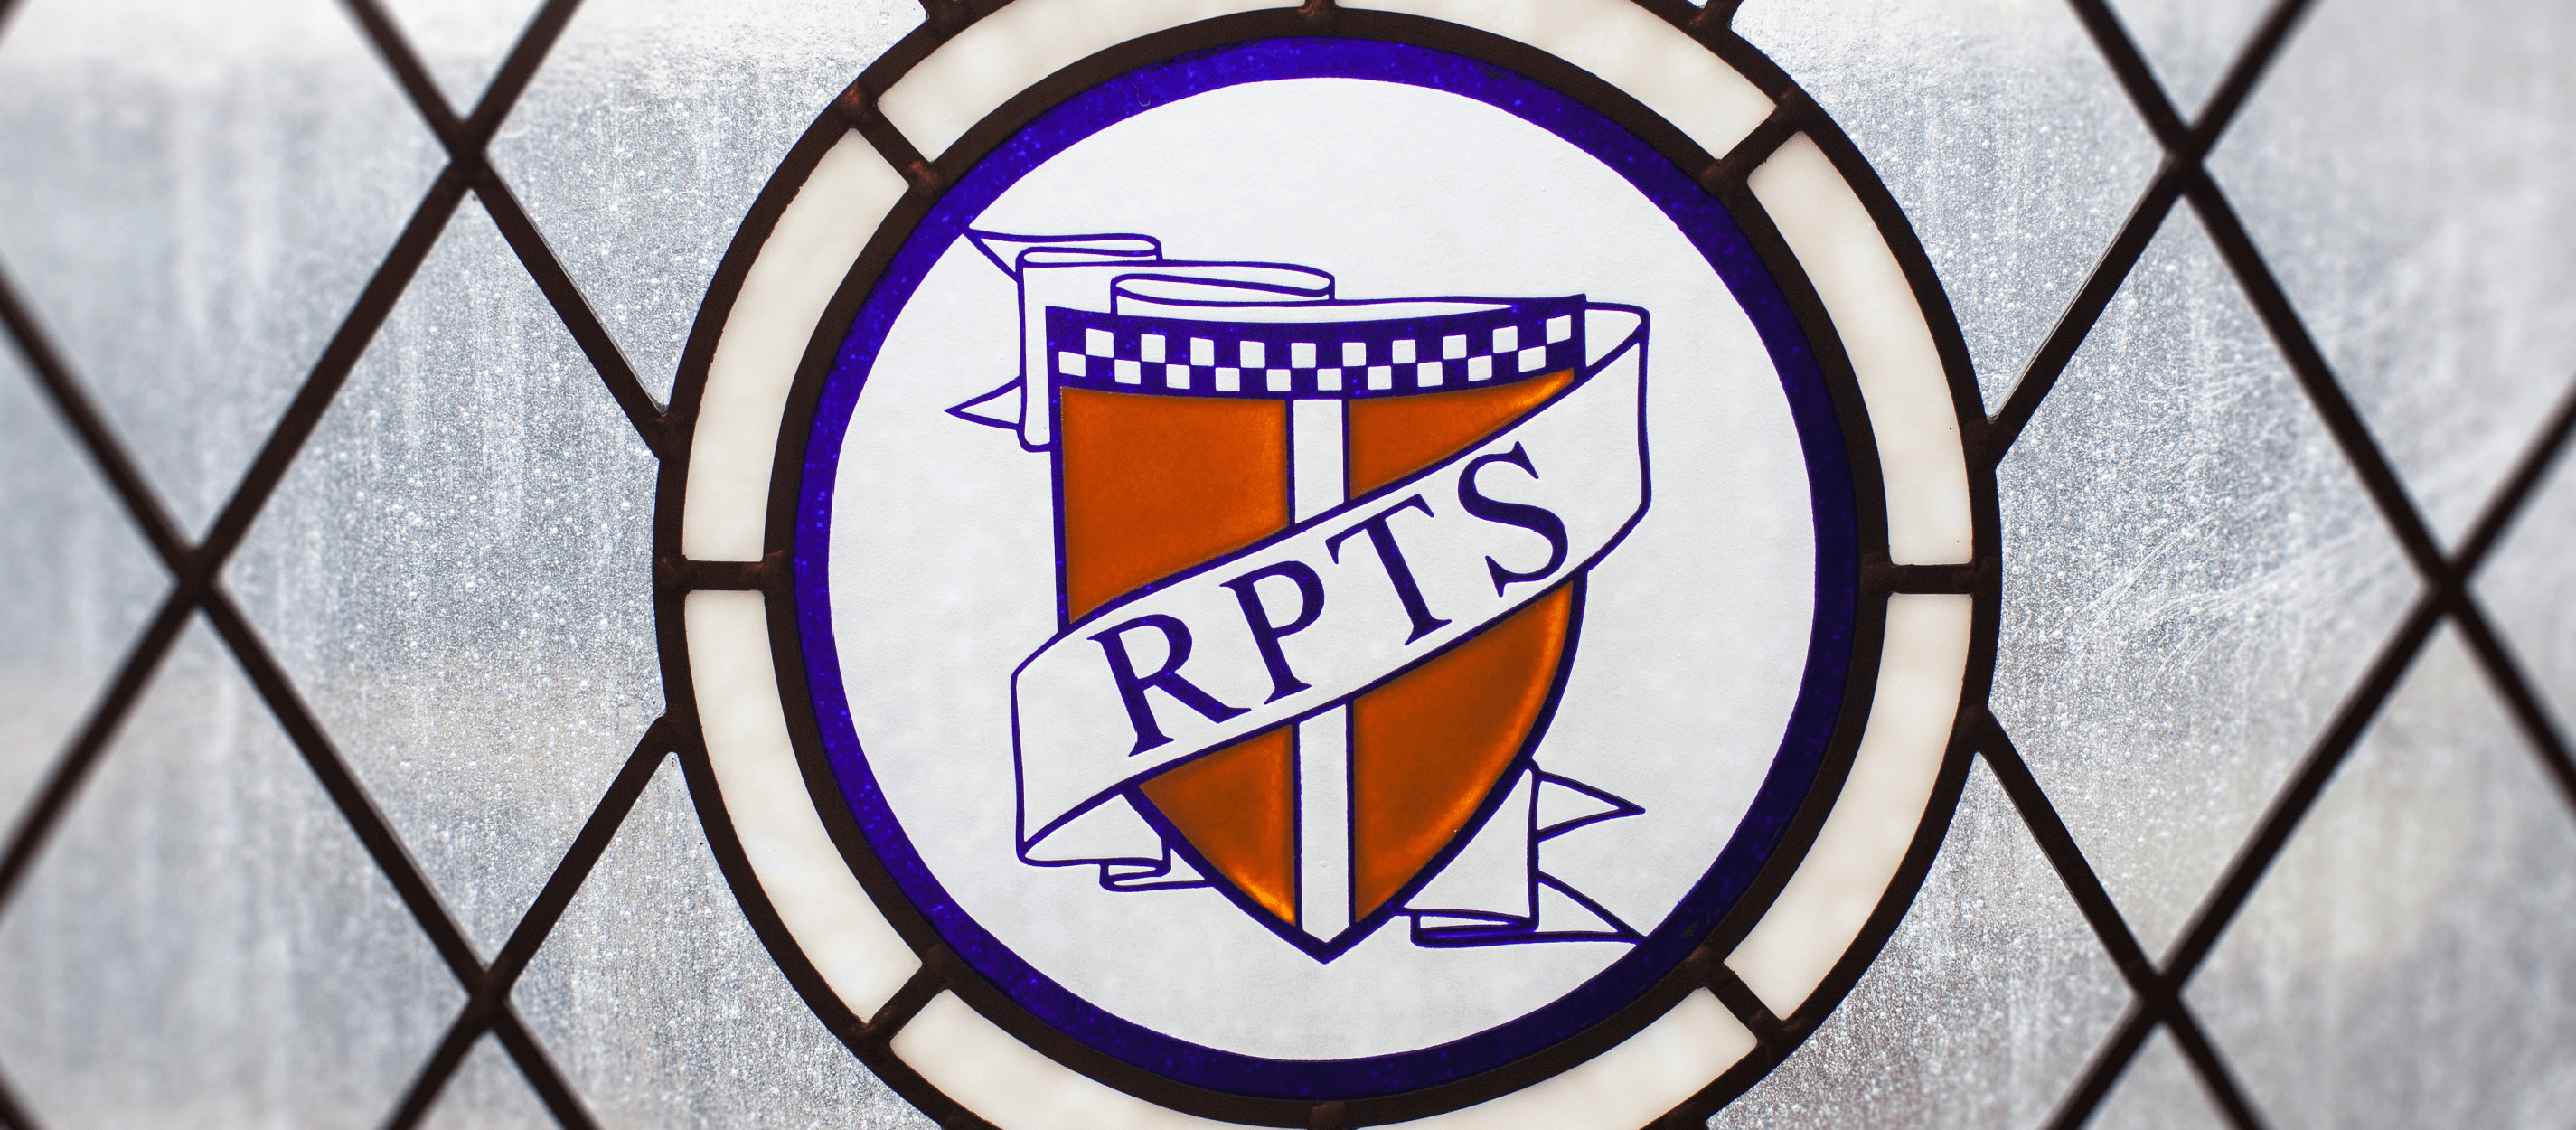 Give to RPTS